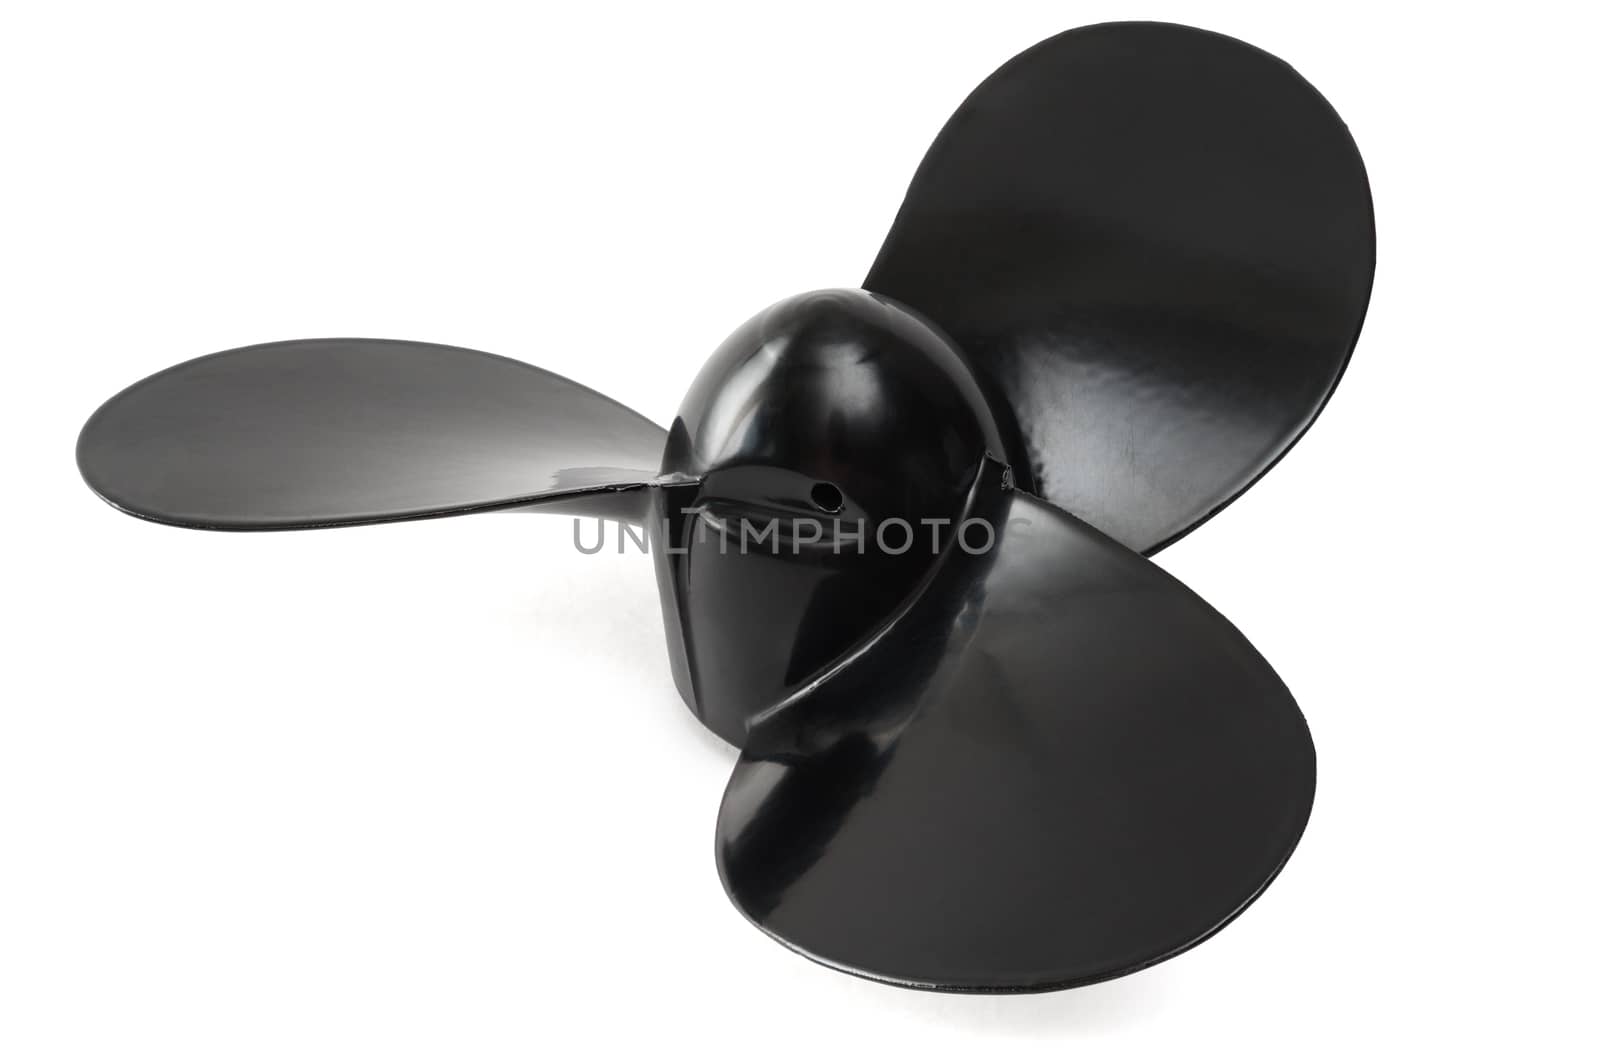 Black propeller for the outboard motor is isolated on a white background